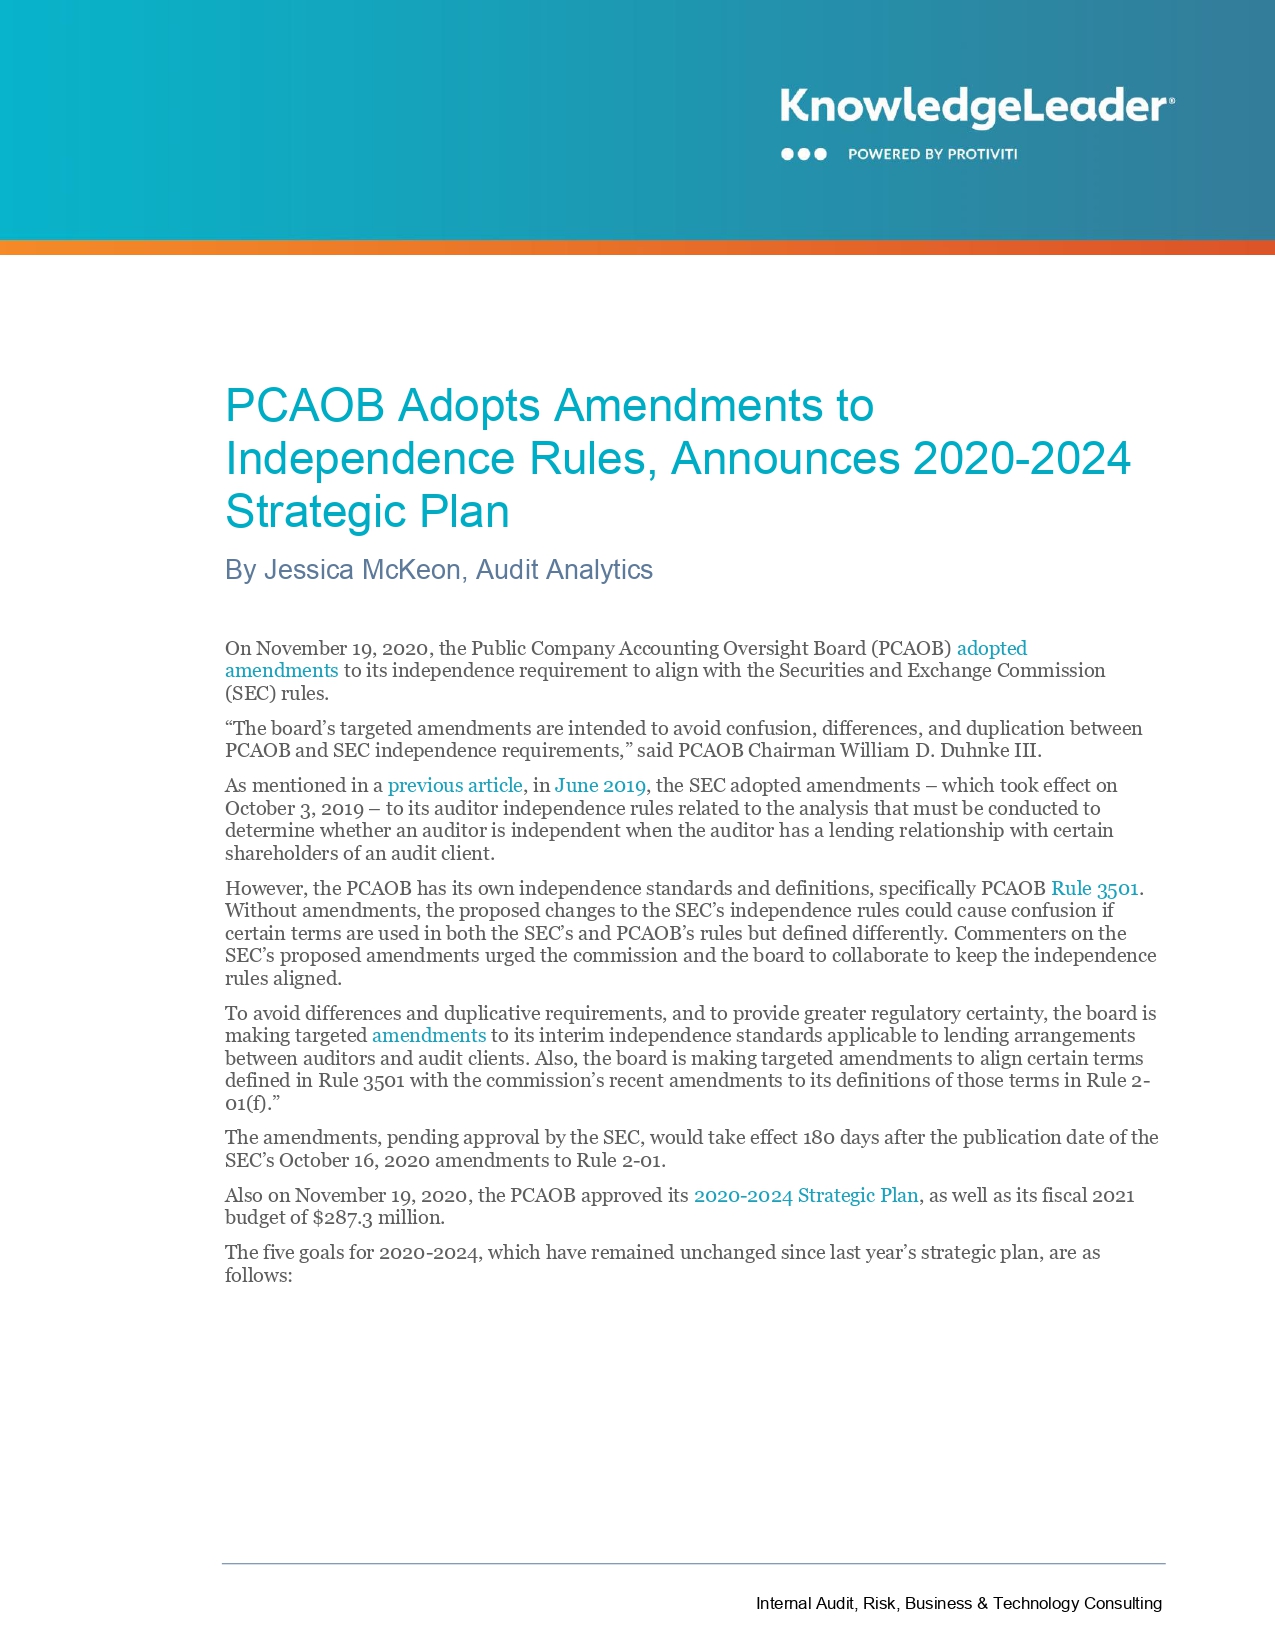 Screenshot of PCAOB Adopts Amendments to Independence Rules, Announces 2020-2024 Strategic Plan